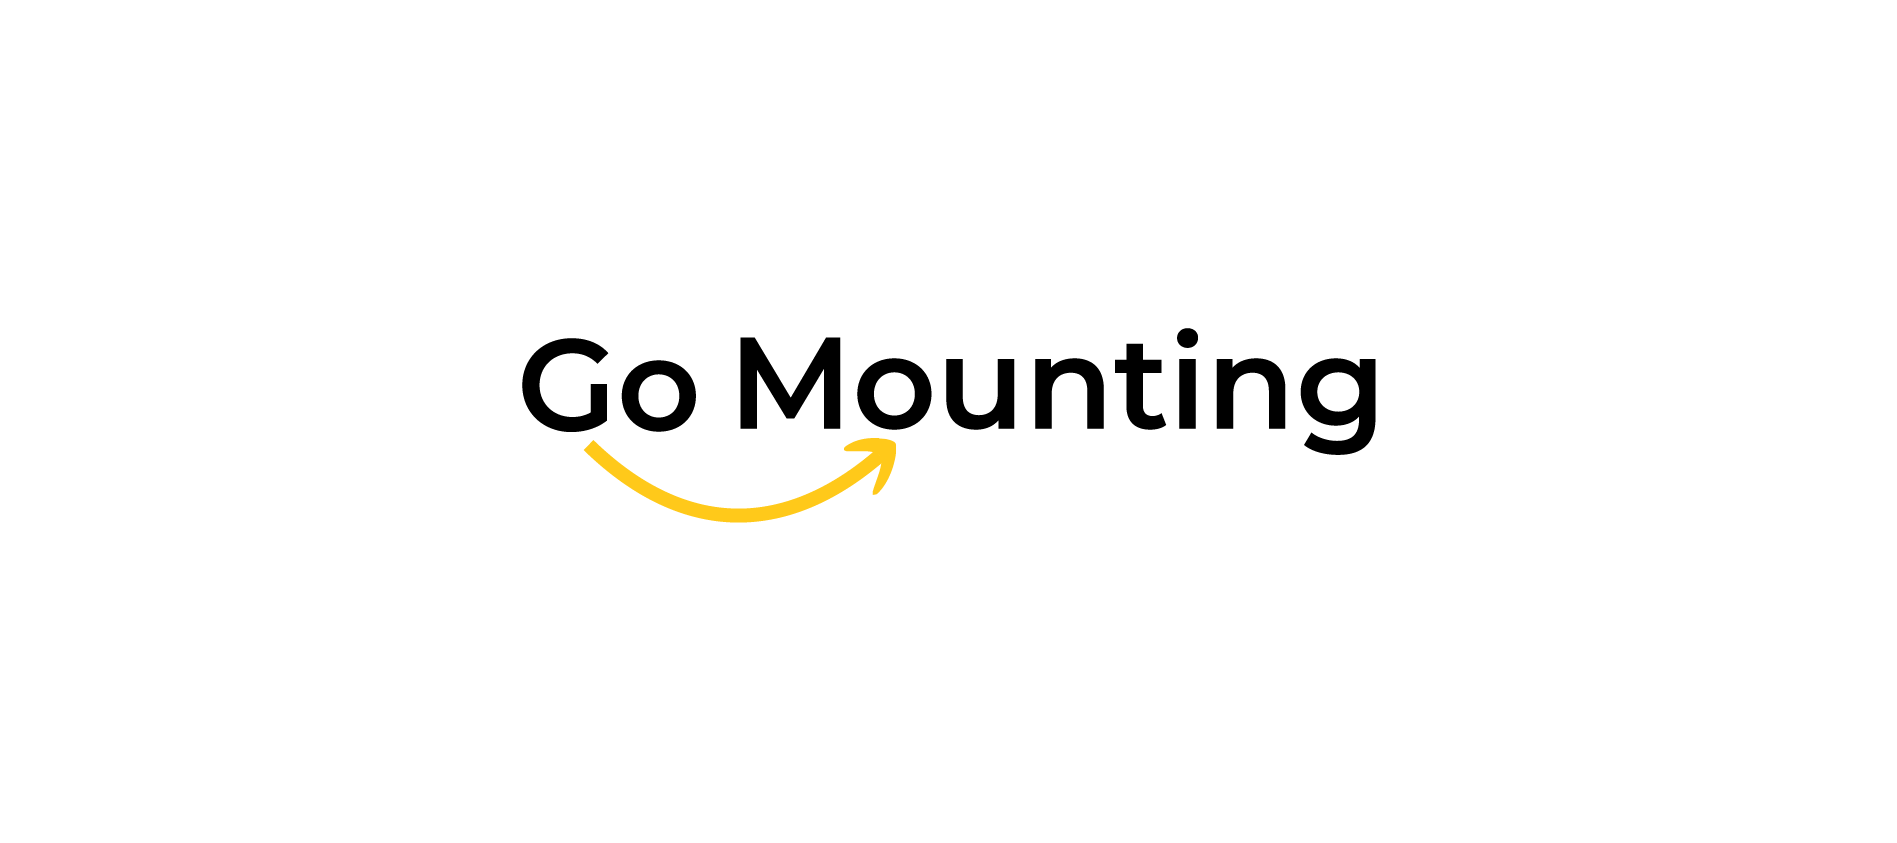 Go Mounting